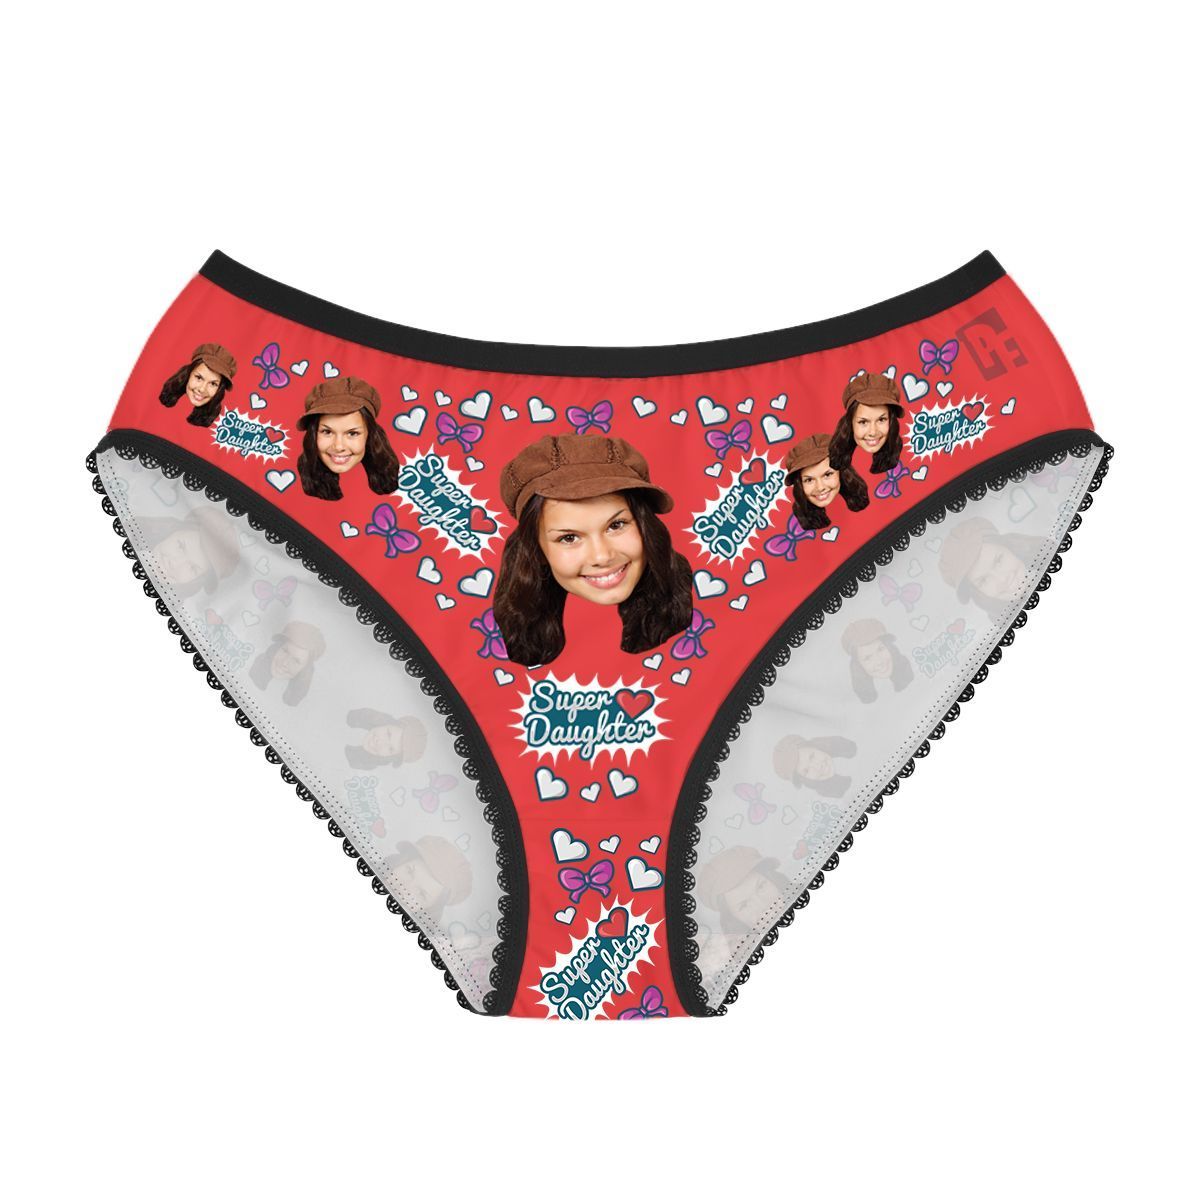 Red Super daughter women's underwear briefs personalized with photo printed on them